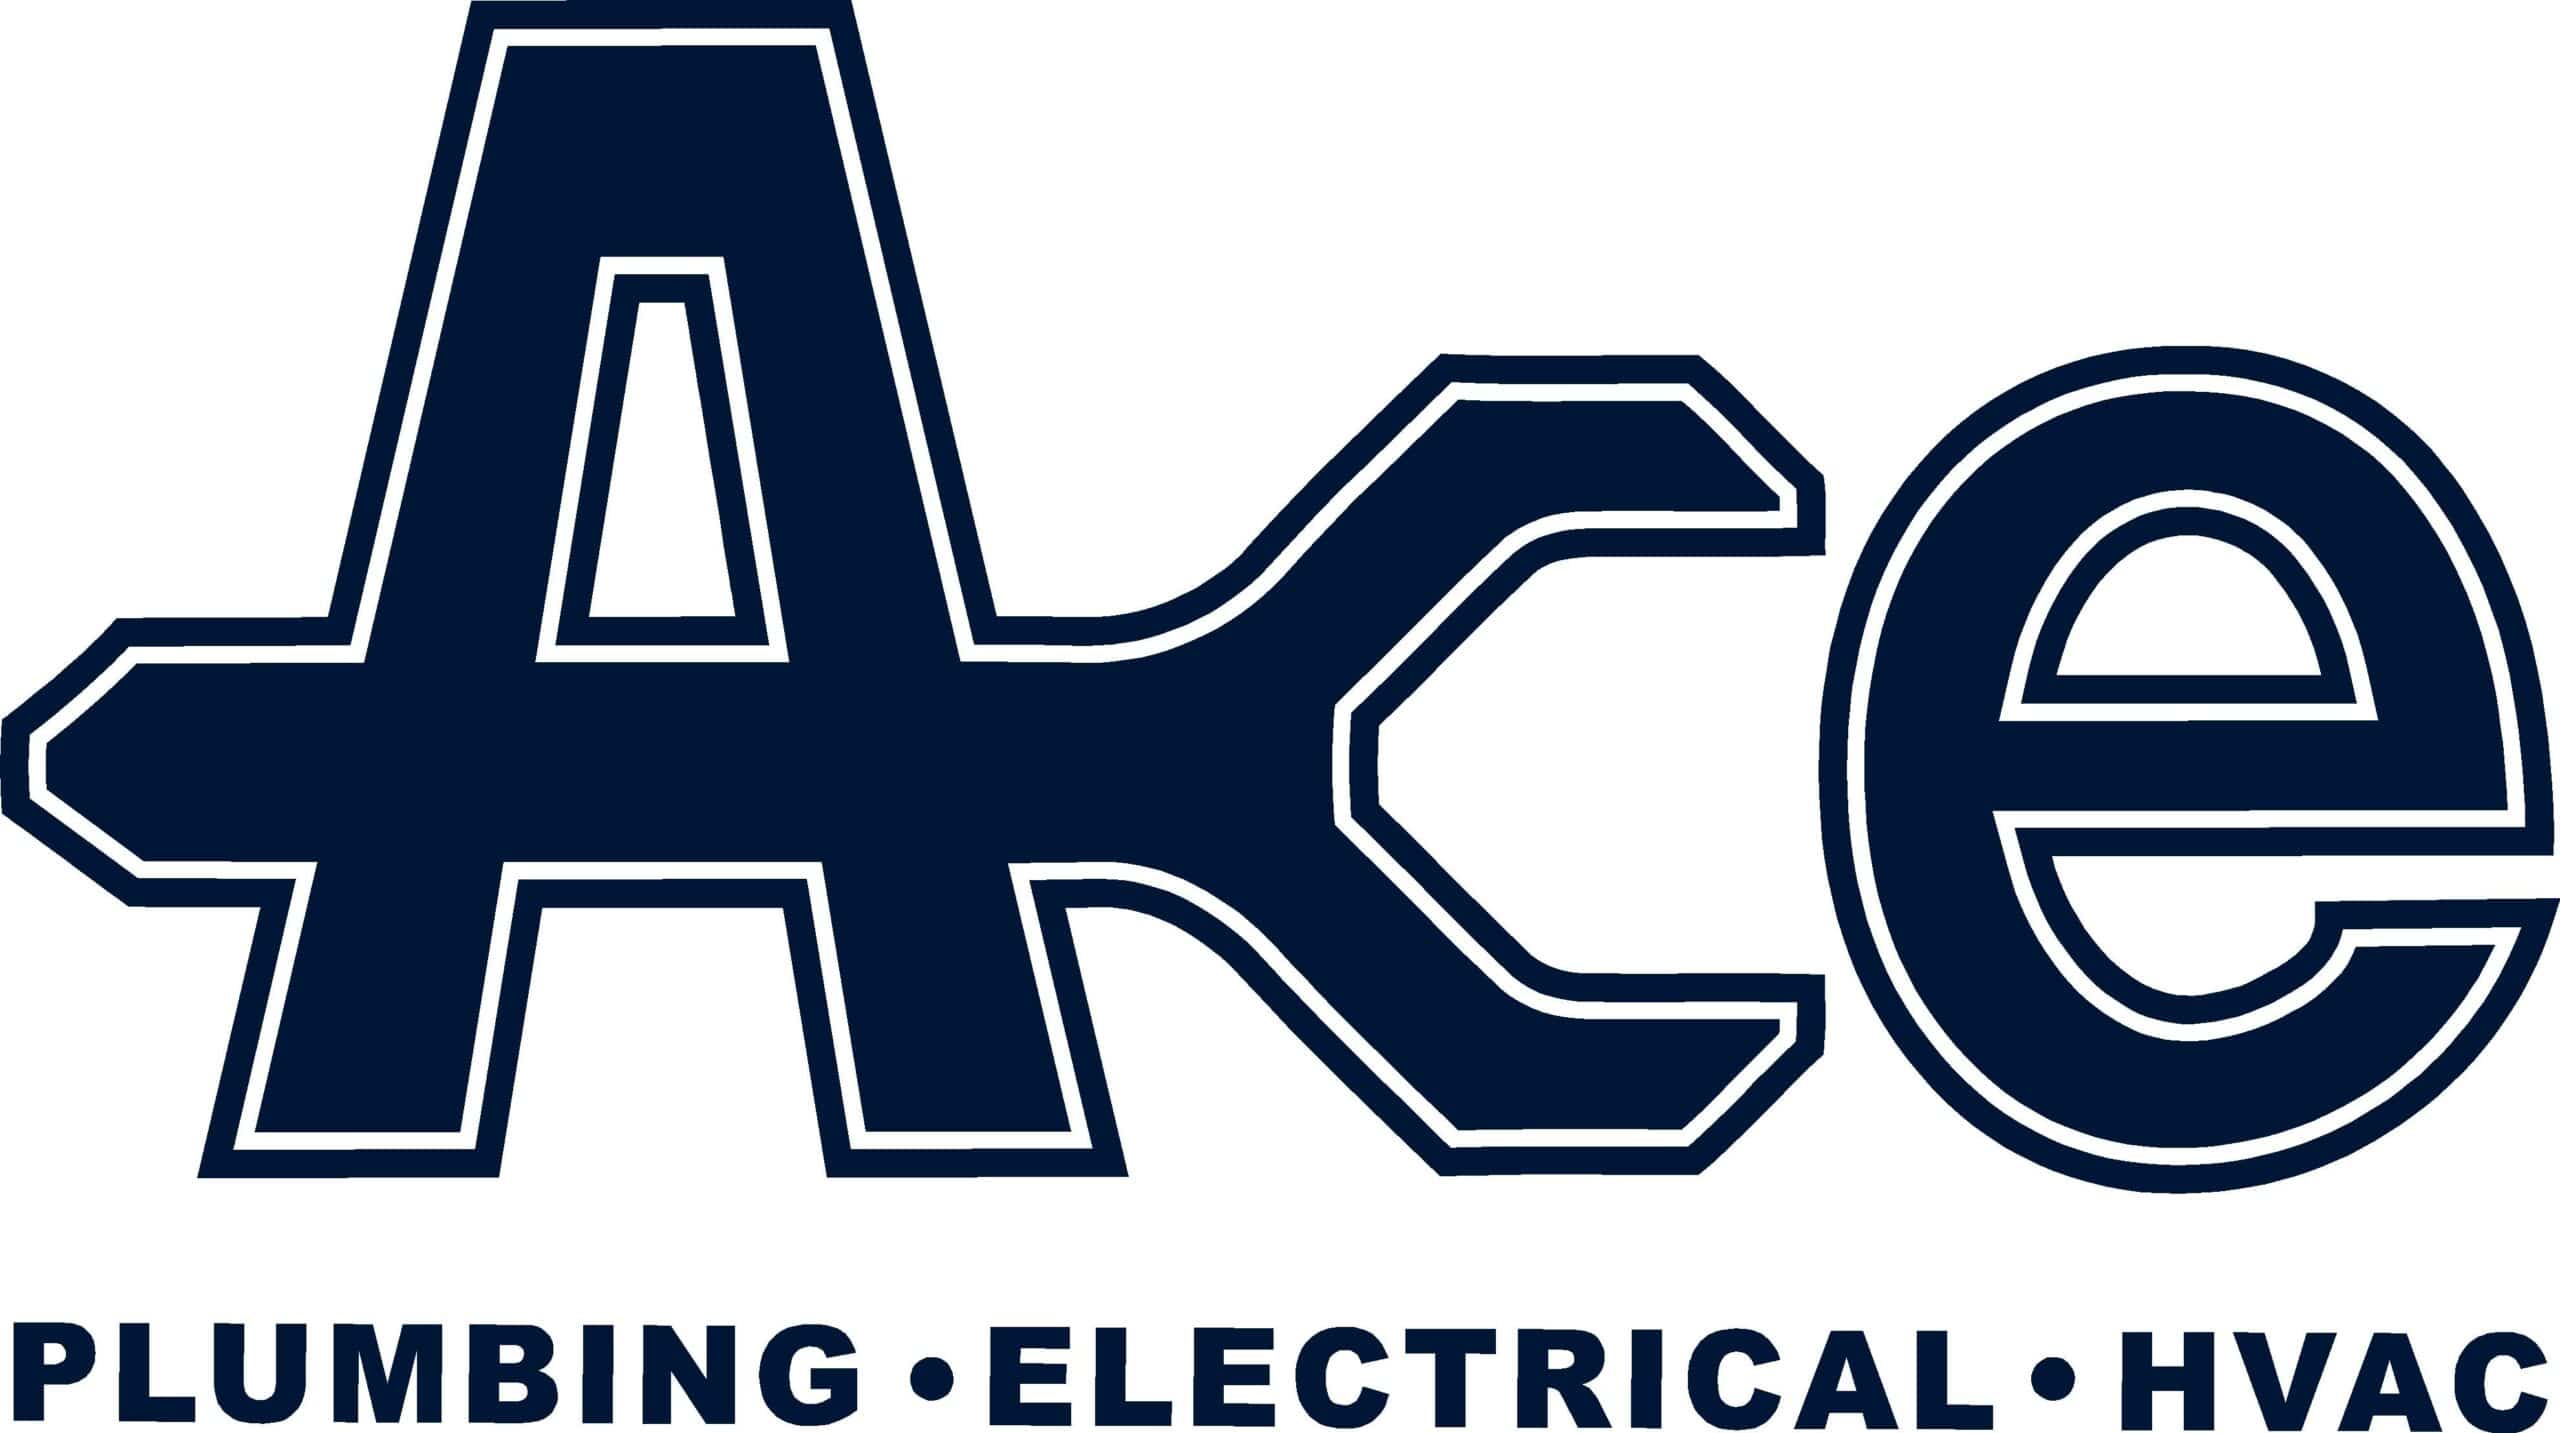 Ace Plumbing, Electric, Heating & Air Shares Why Property Owners Should Choose Them